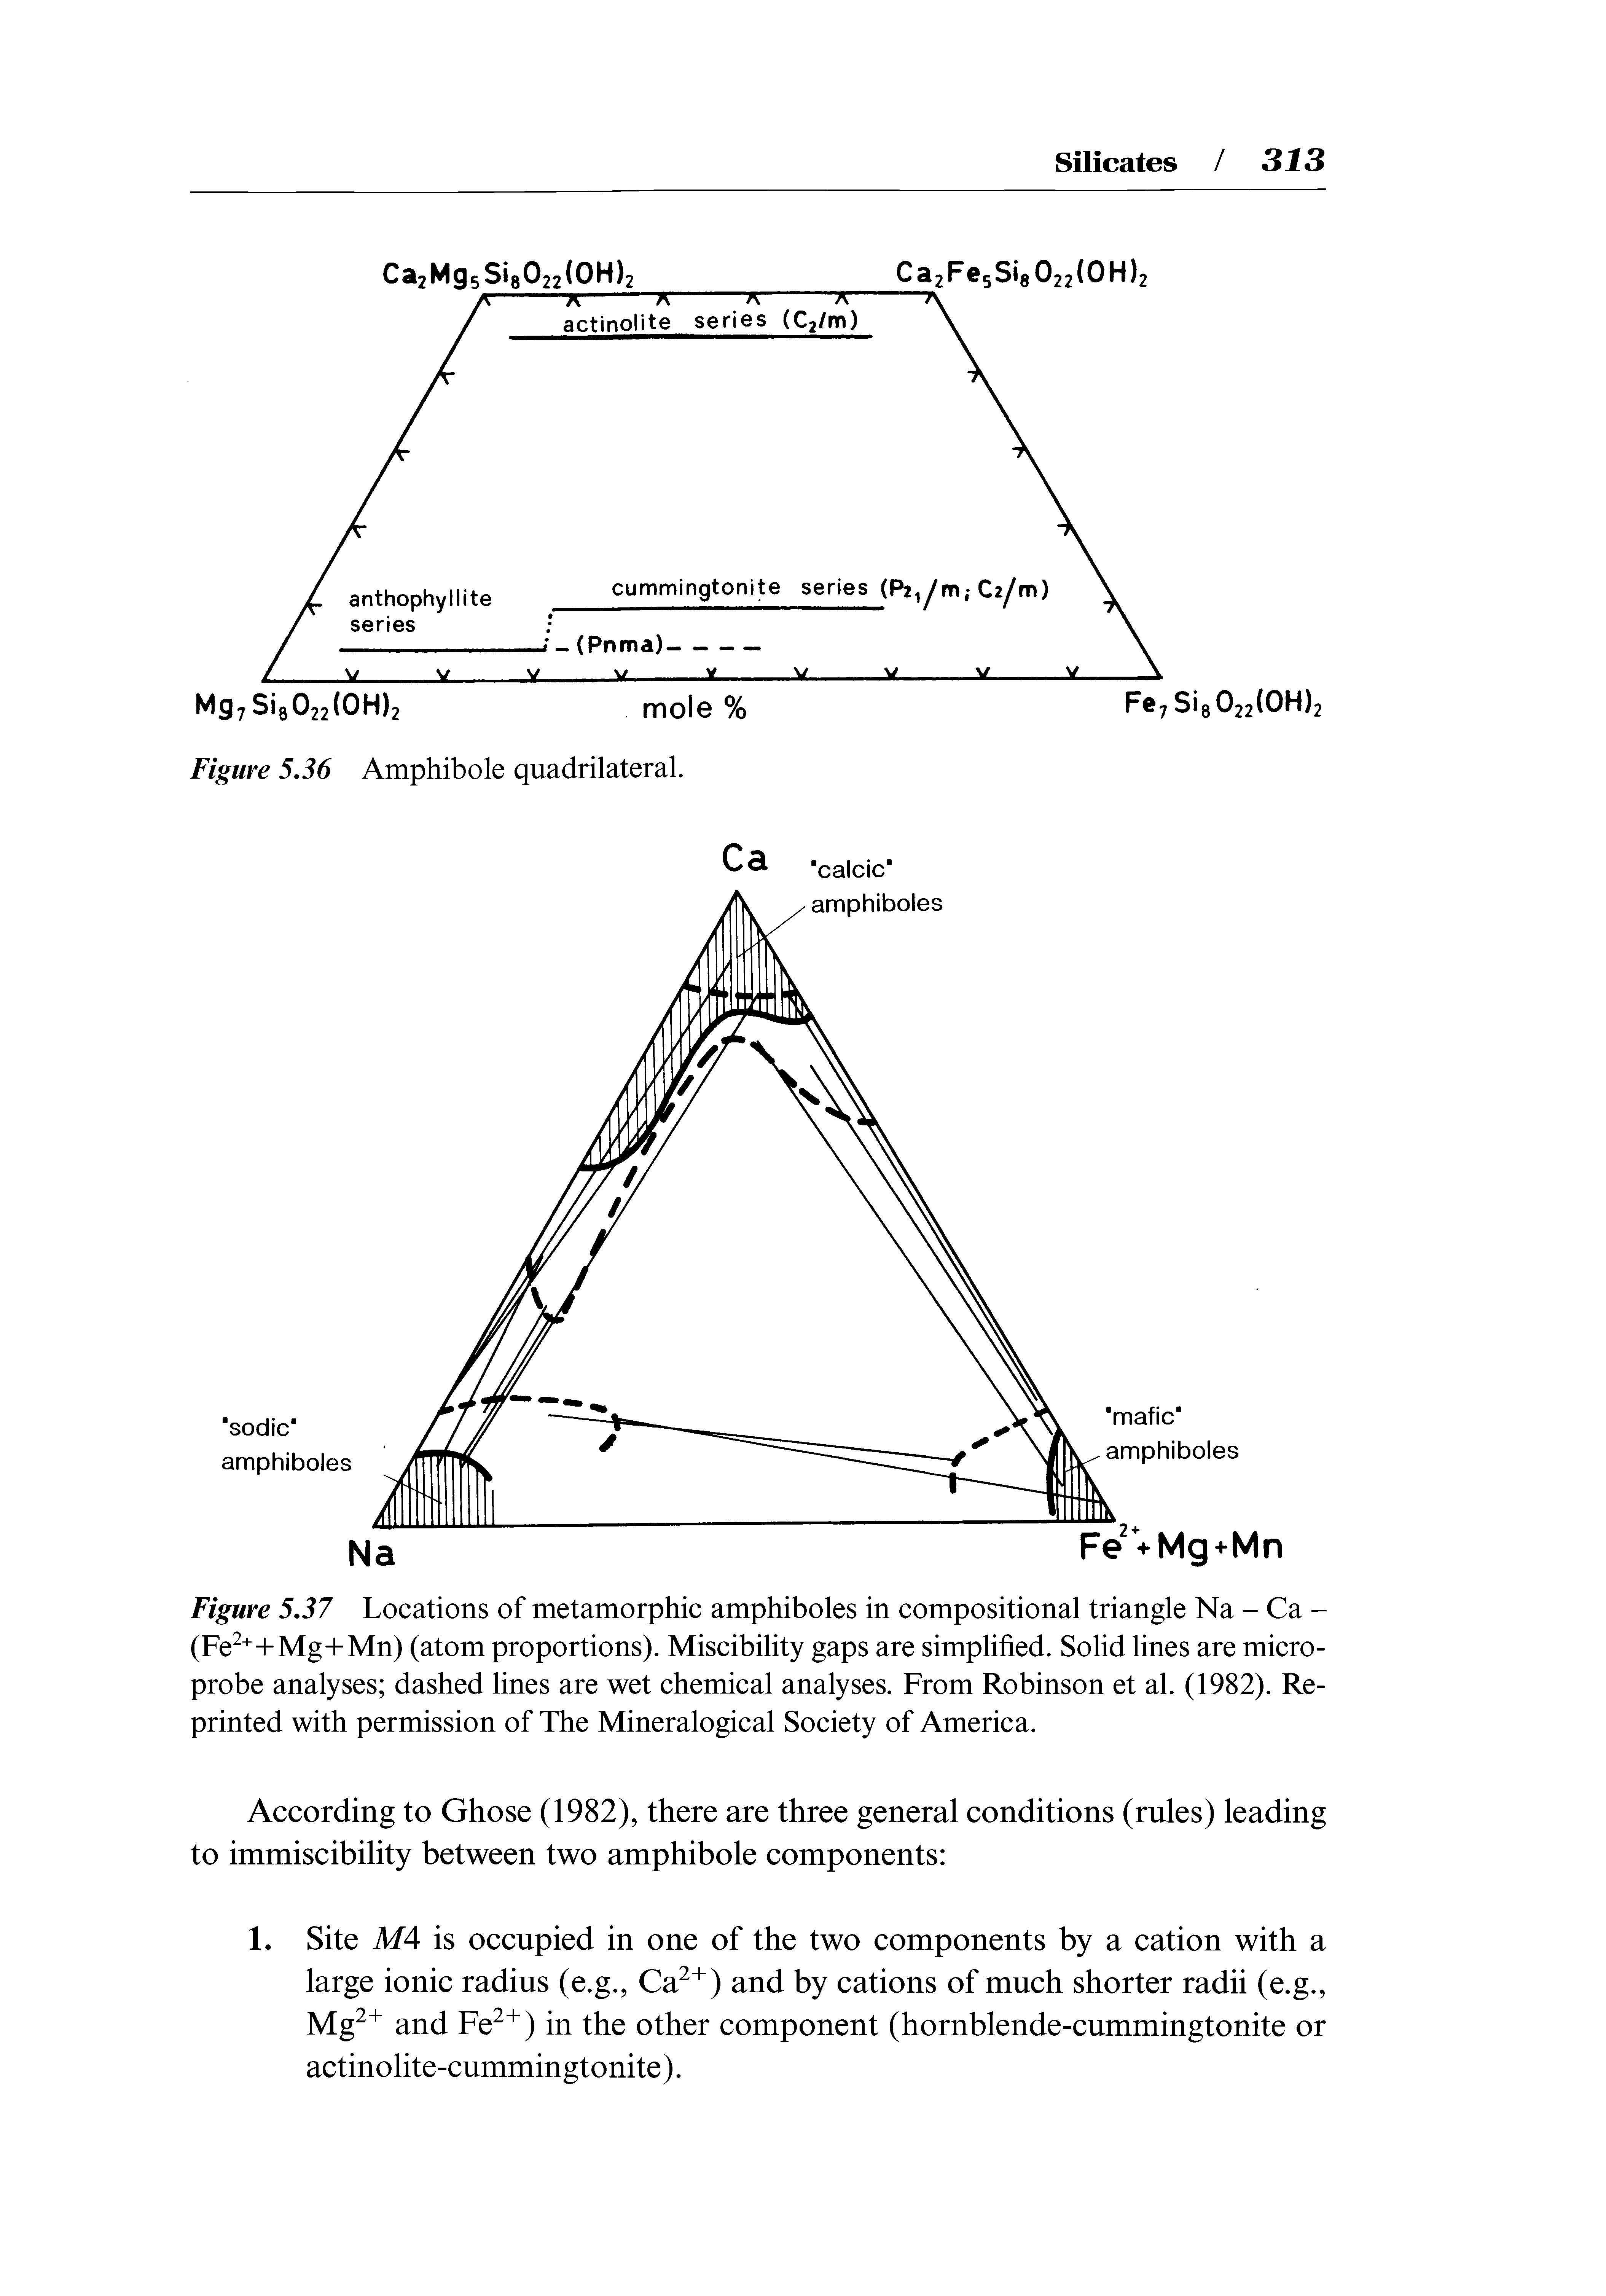 Figure 537 Locations of metamorphic amphiboles in compositional triangle Na -Ca-(Fe ++Mg+Mn) (atom proportions). Miscibility gaps are simplified. Solid lines are microprobe analyses dashed lines are wet chemical analyses. From Robinson et al. (1982). Reprinted with permission of The Mineralogical Society of America.